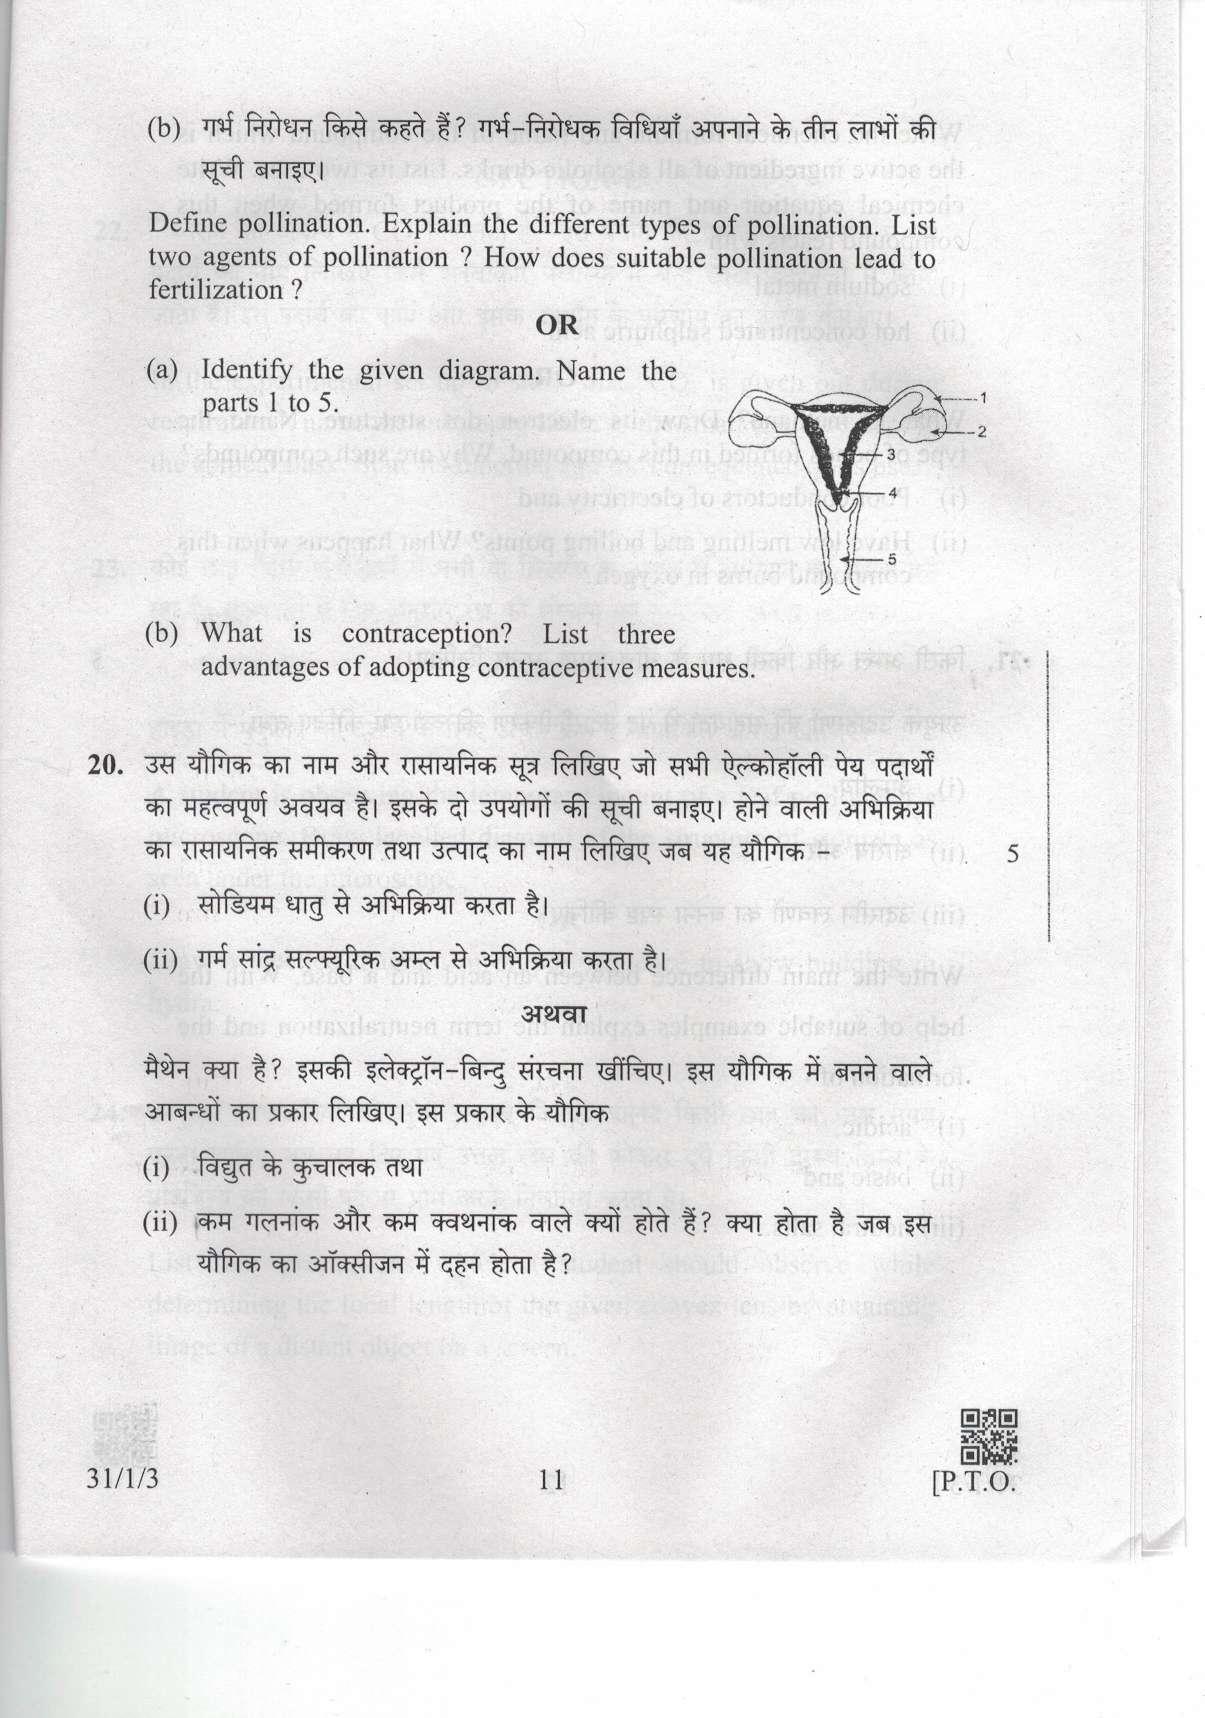 CBSE Class 10 31-1-3 Science 2019 Question Paper - Page 11